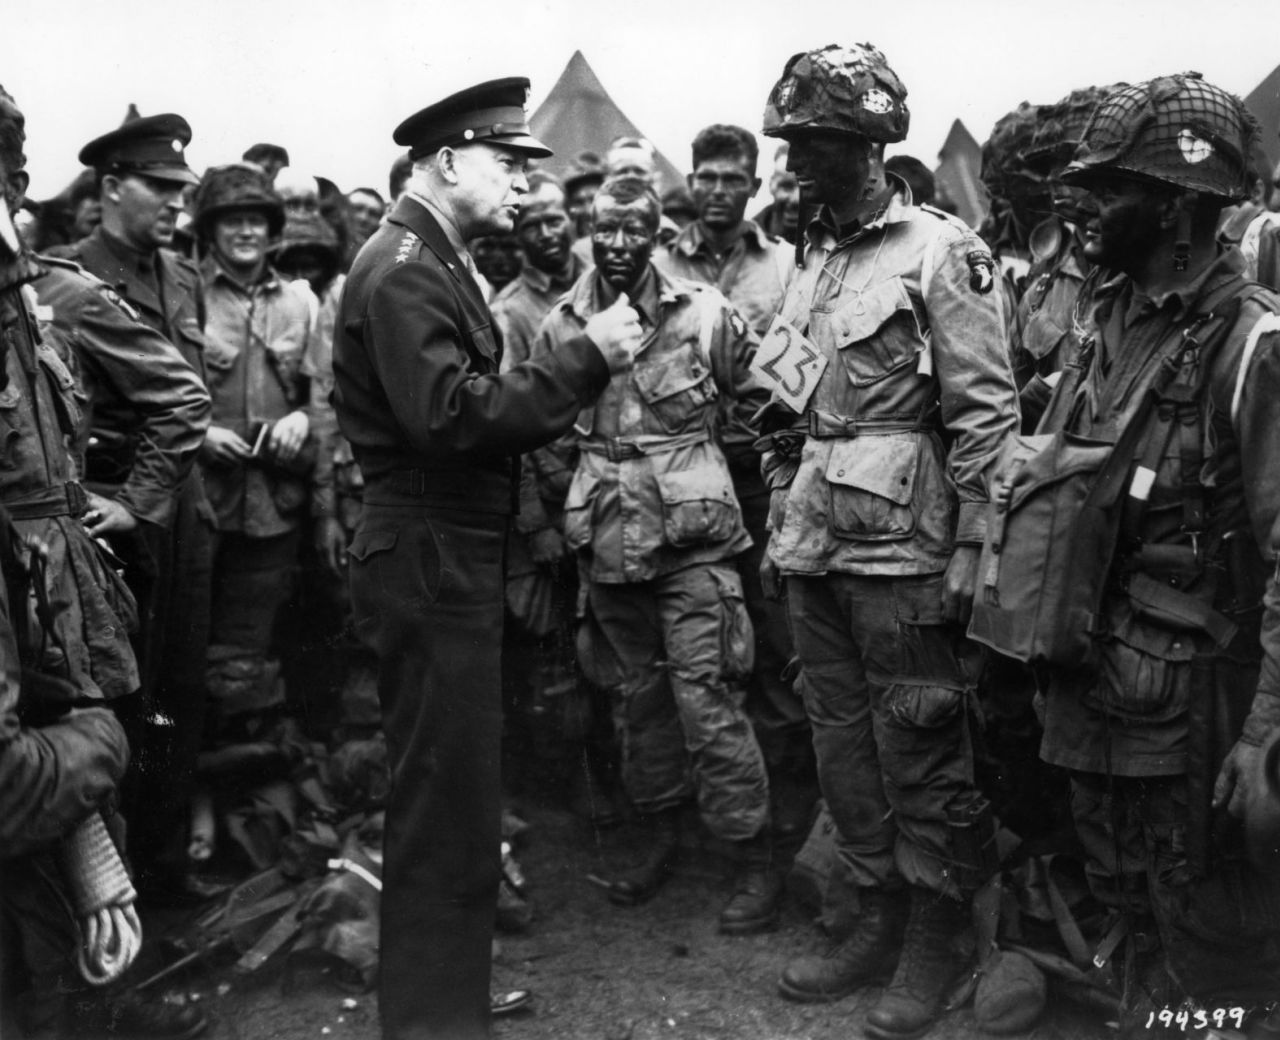 Dwight D. Eisenhower, supreme commander of the Allied forces, gives the order of the day to paratroopers in England. "Full victory — nothing else" was the command just before they boarded their planes to participate in the first wave.